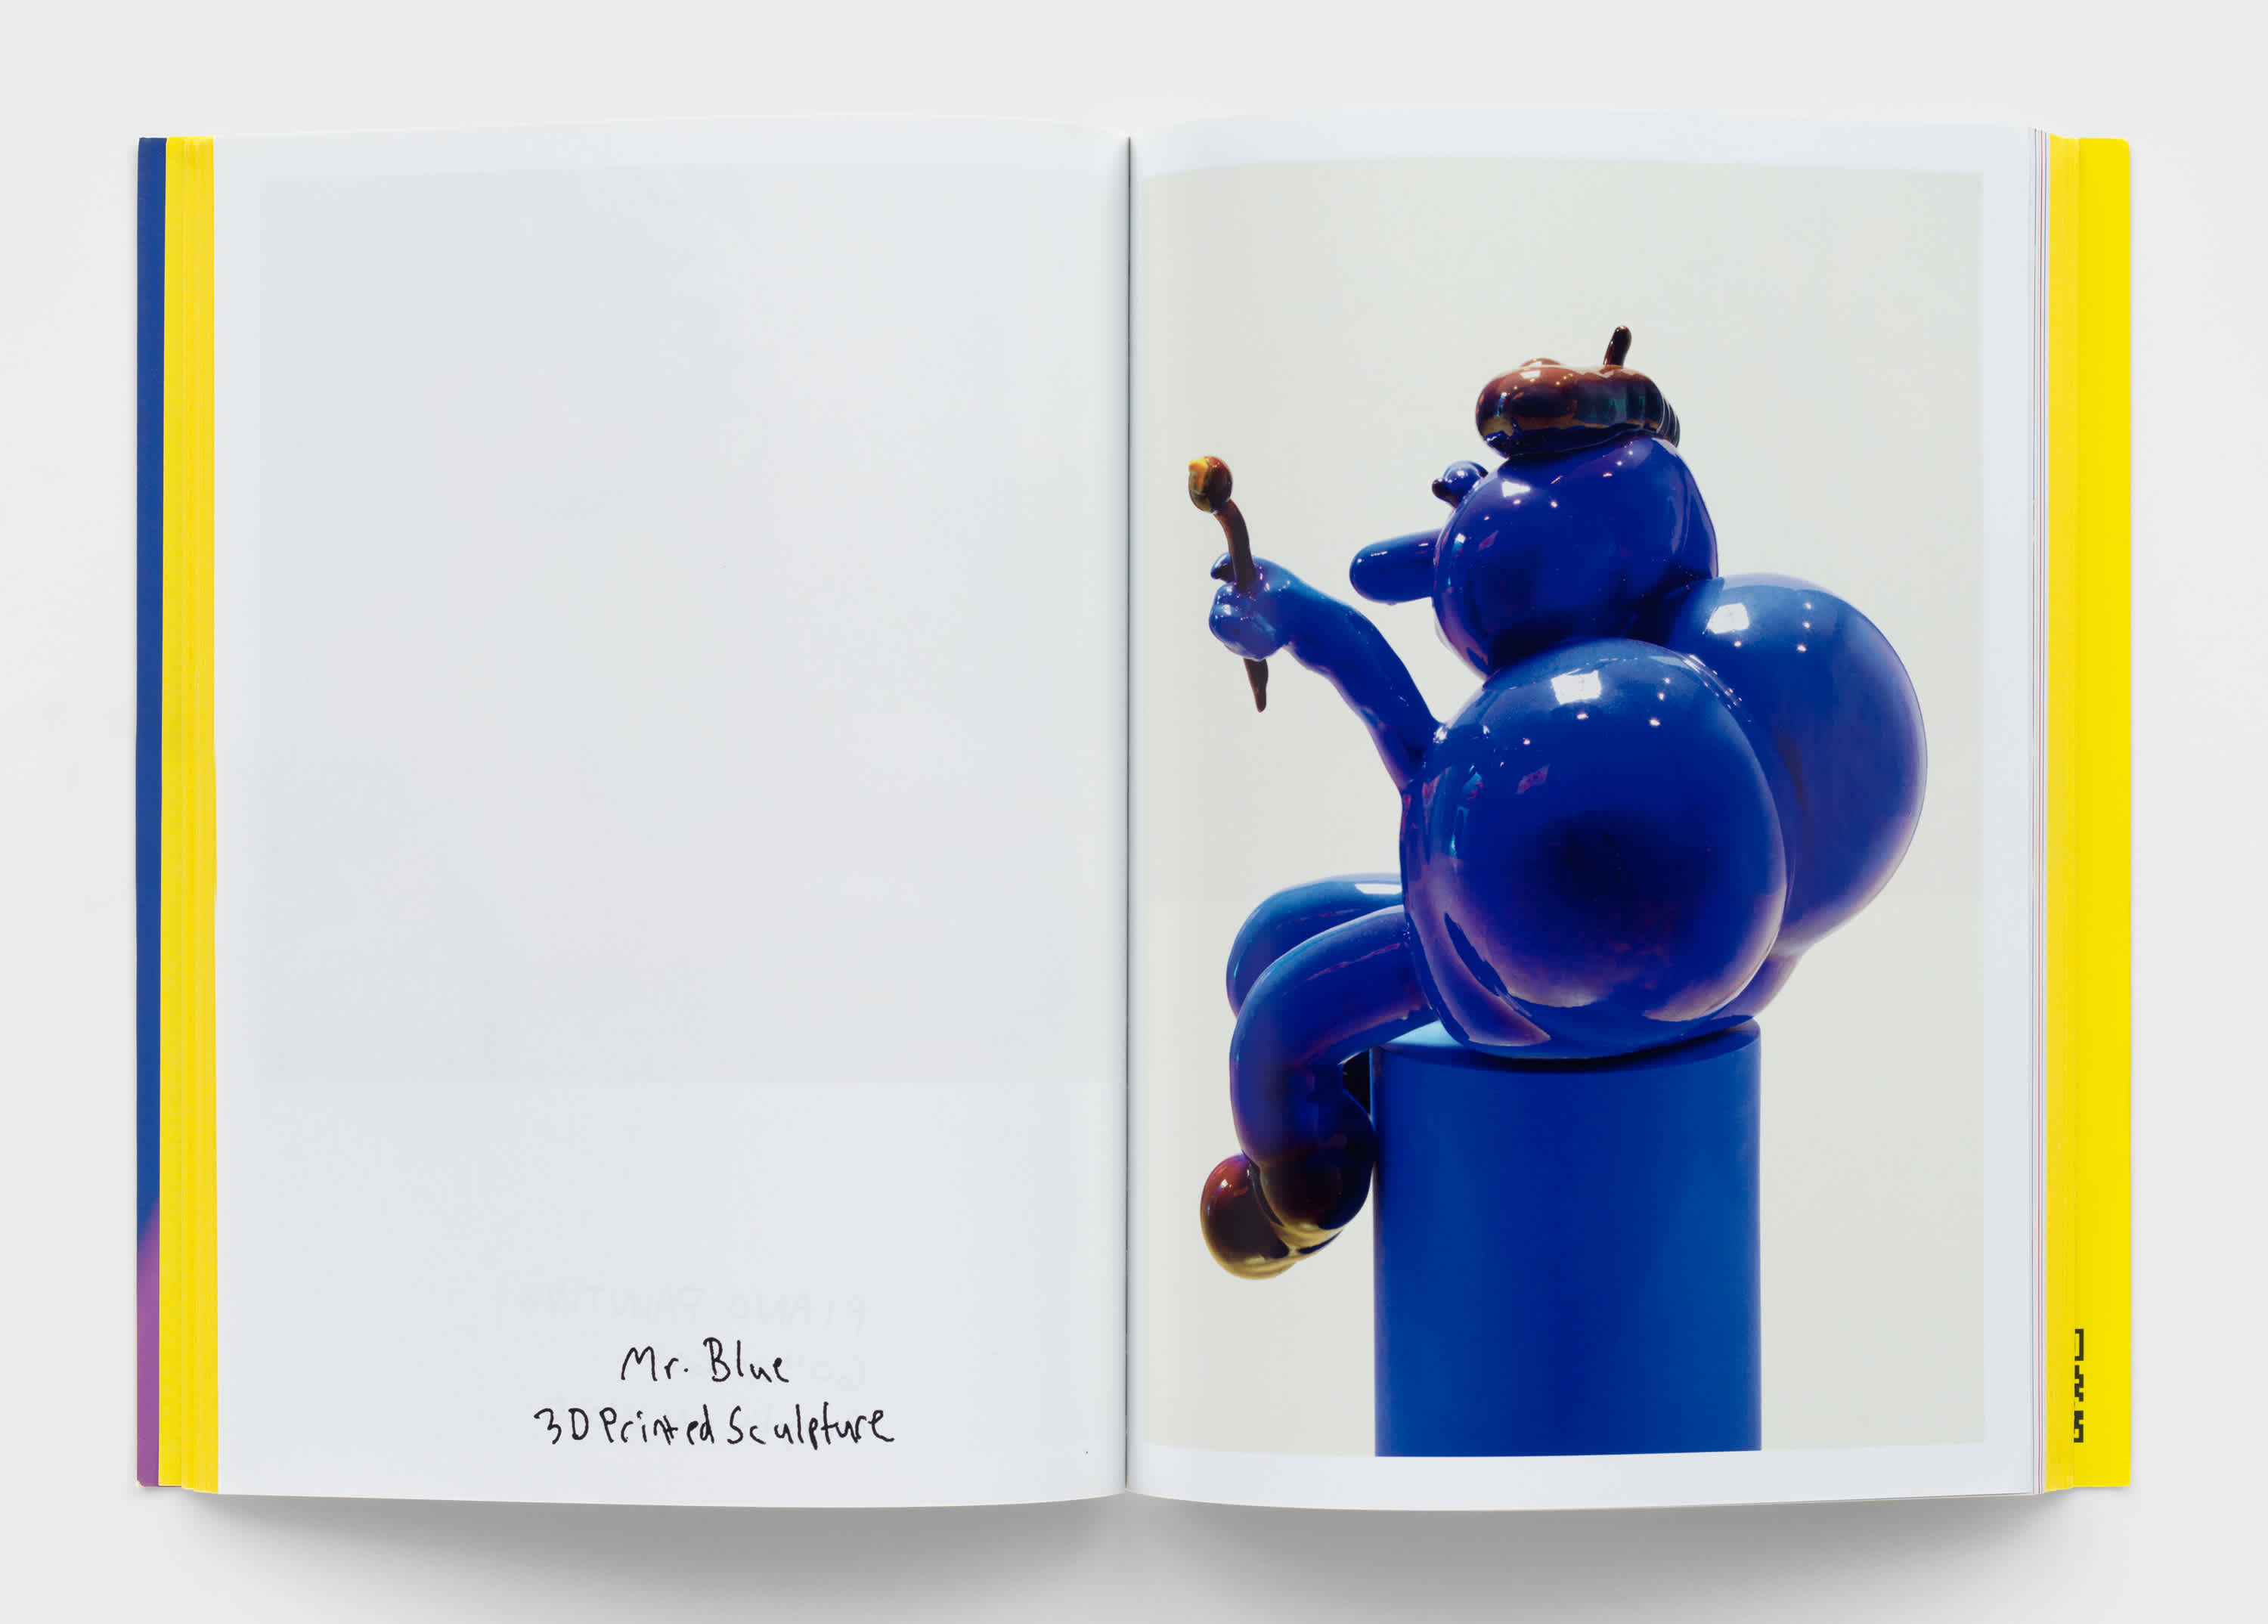 An open book with a photograph of a blue sculpture on the right page. Artwork title and information is on the bottom of the left page.